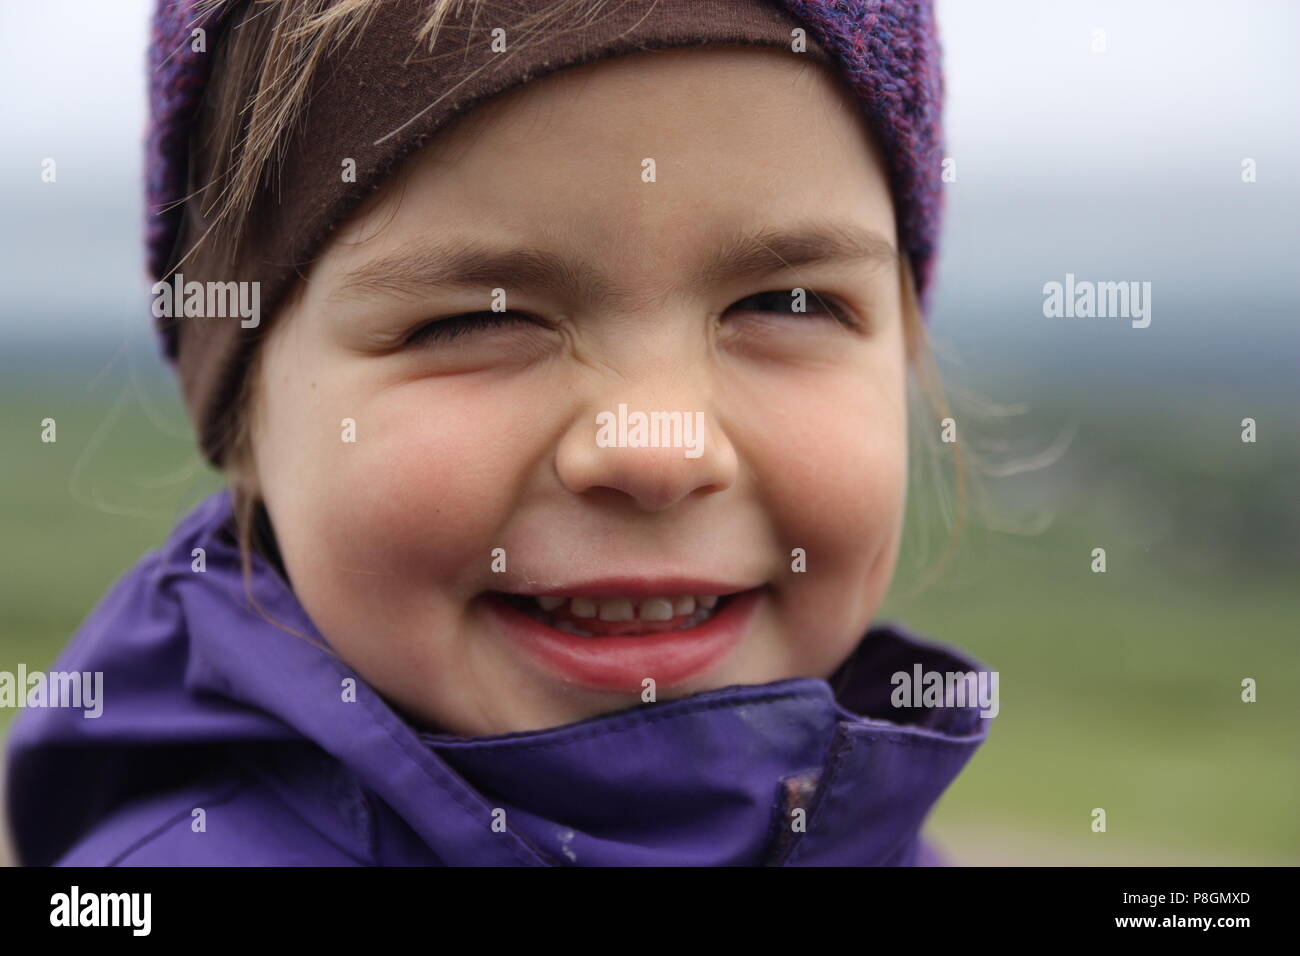 Young girl in purple hiking jacket with cheeky grin winking Stock Photo